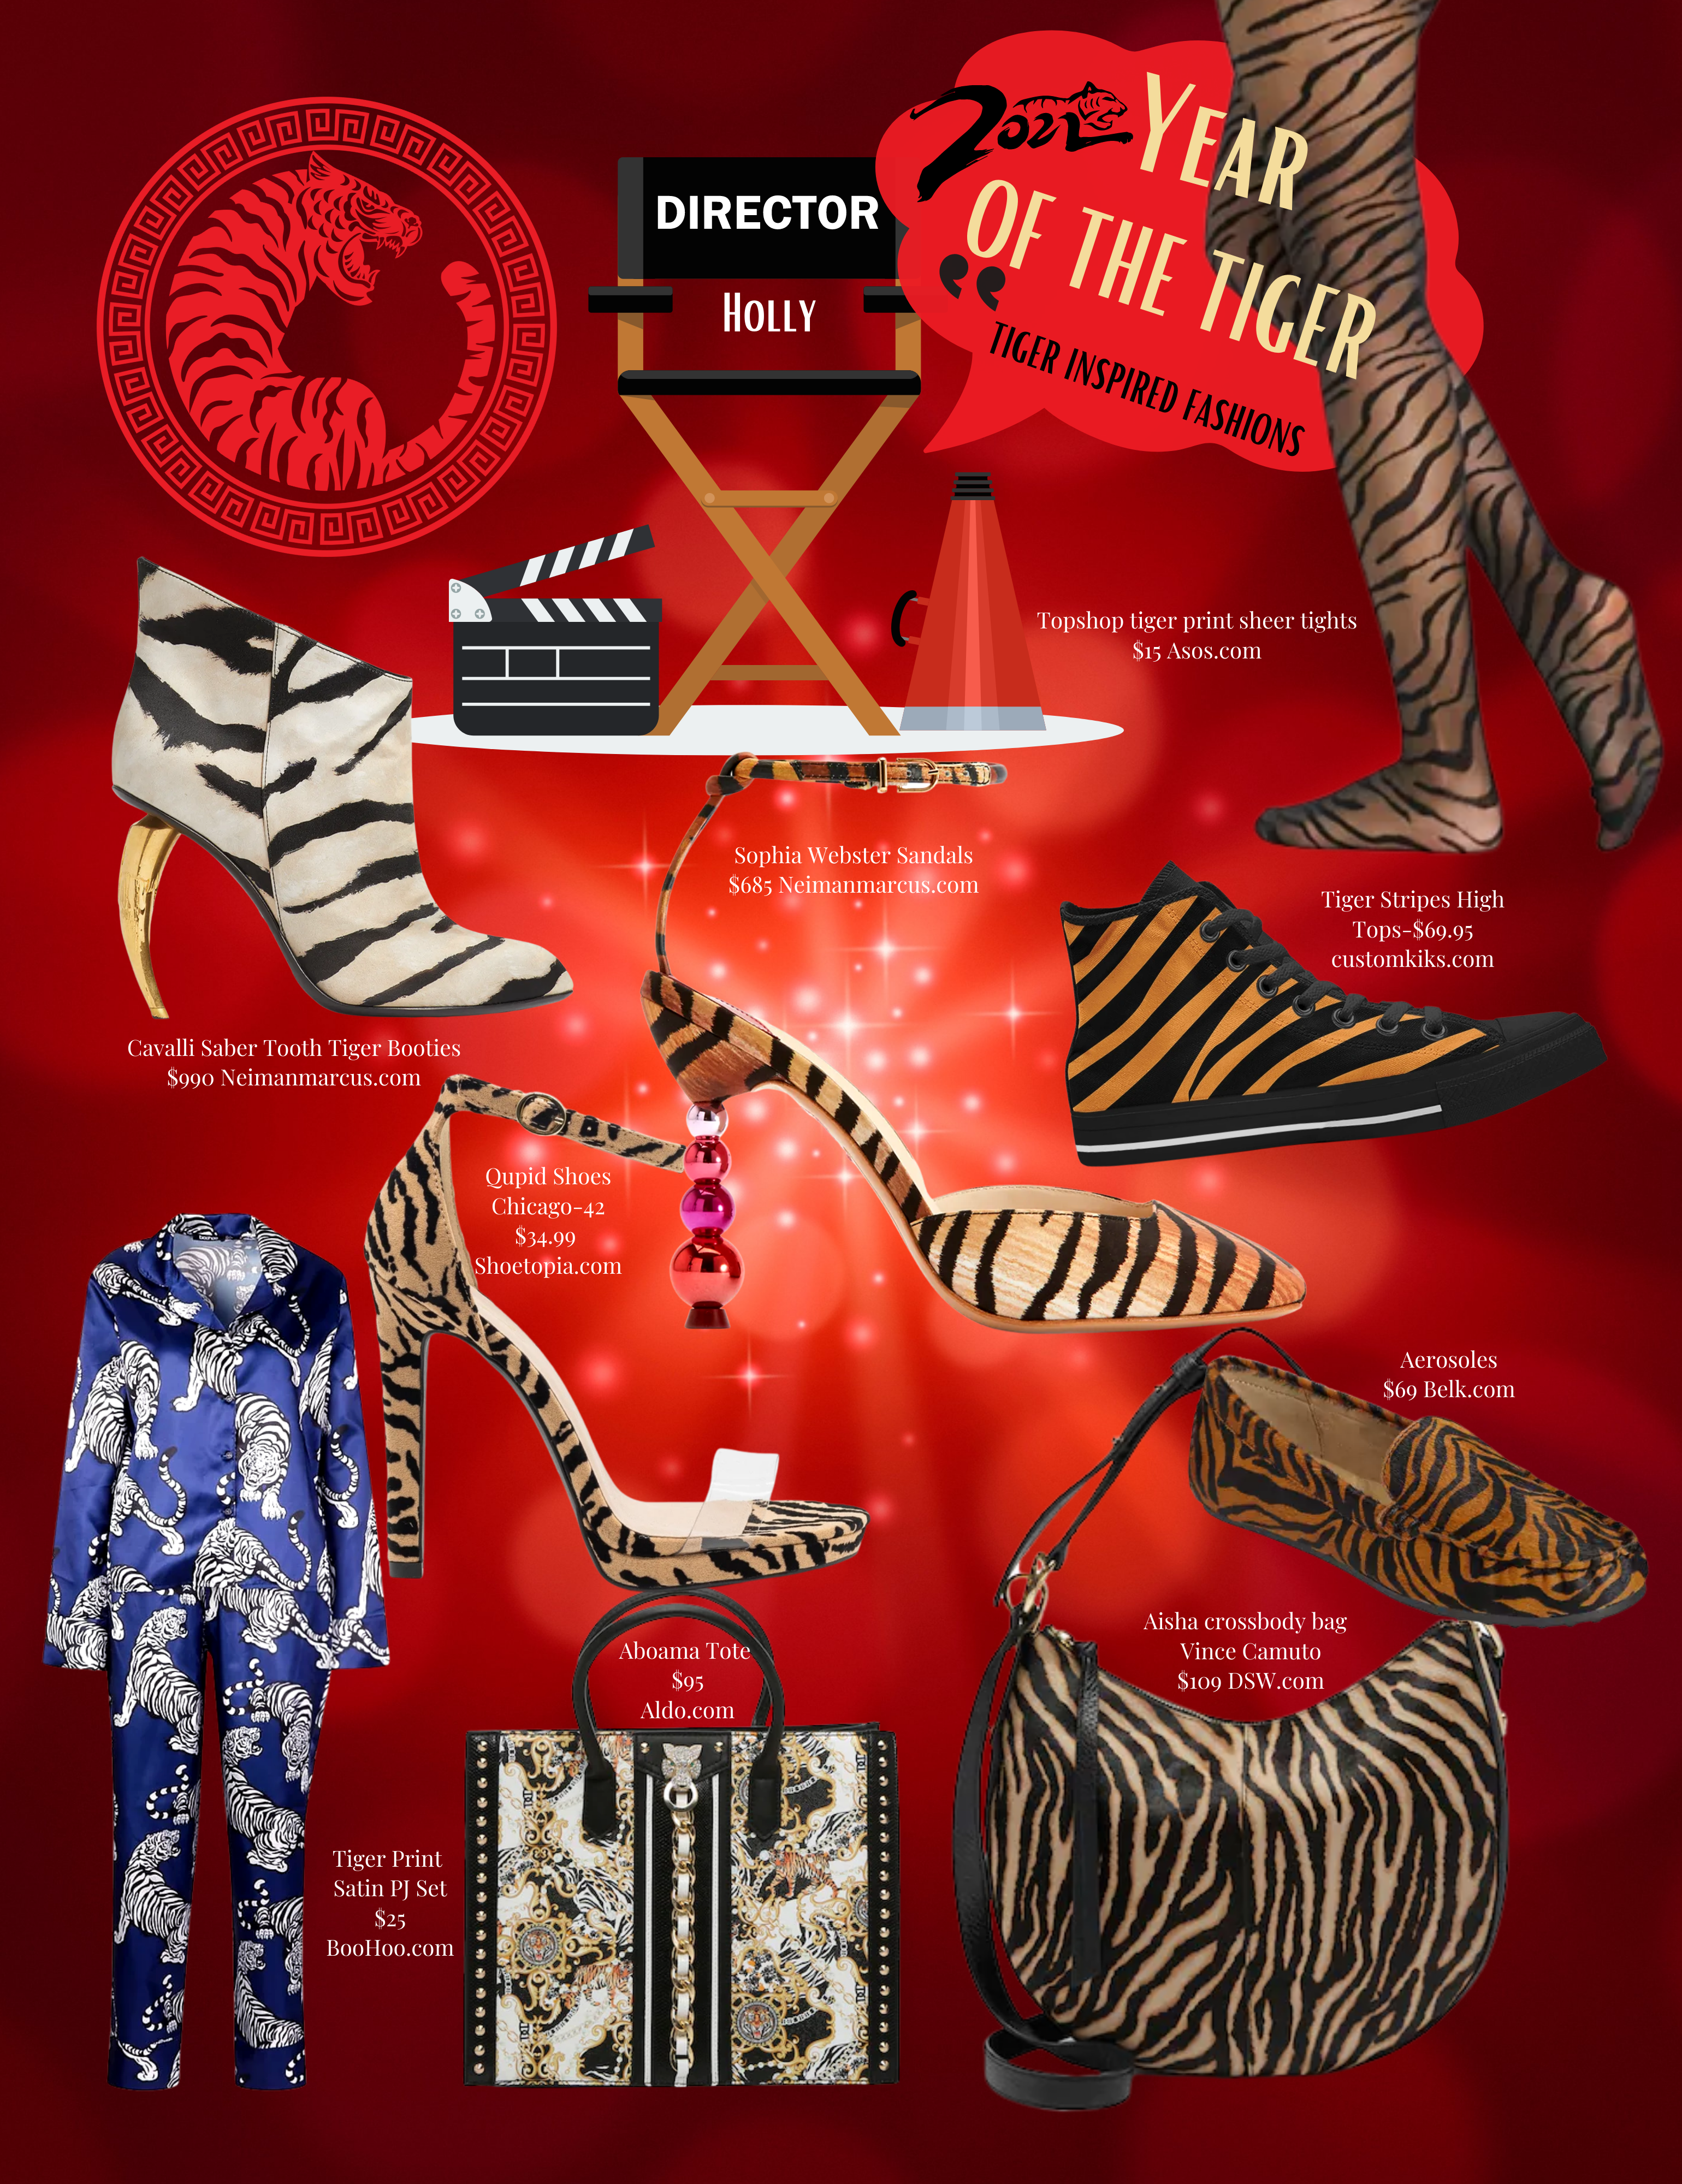 Year of the tiger inspired shoes and clothes